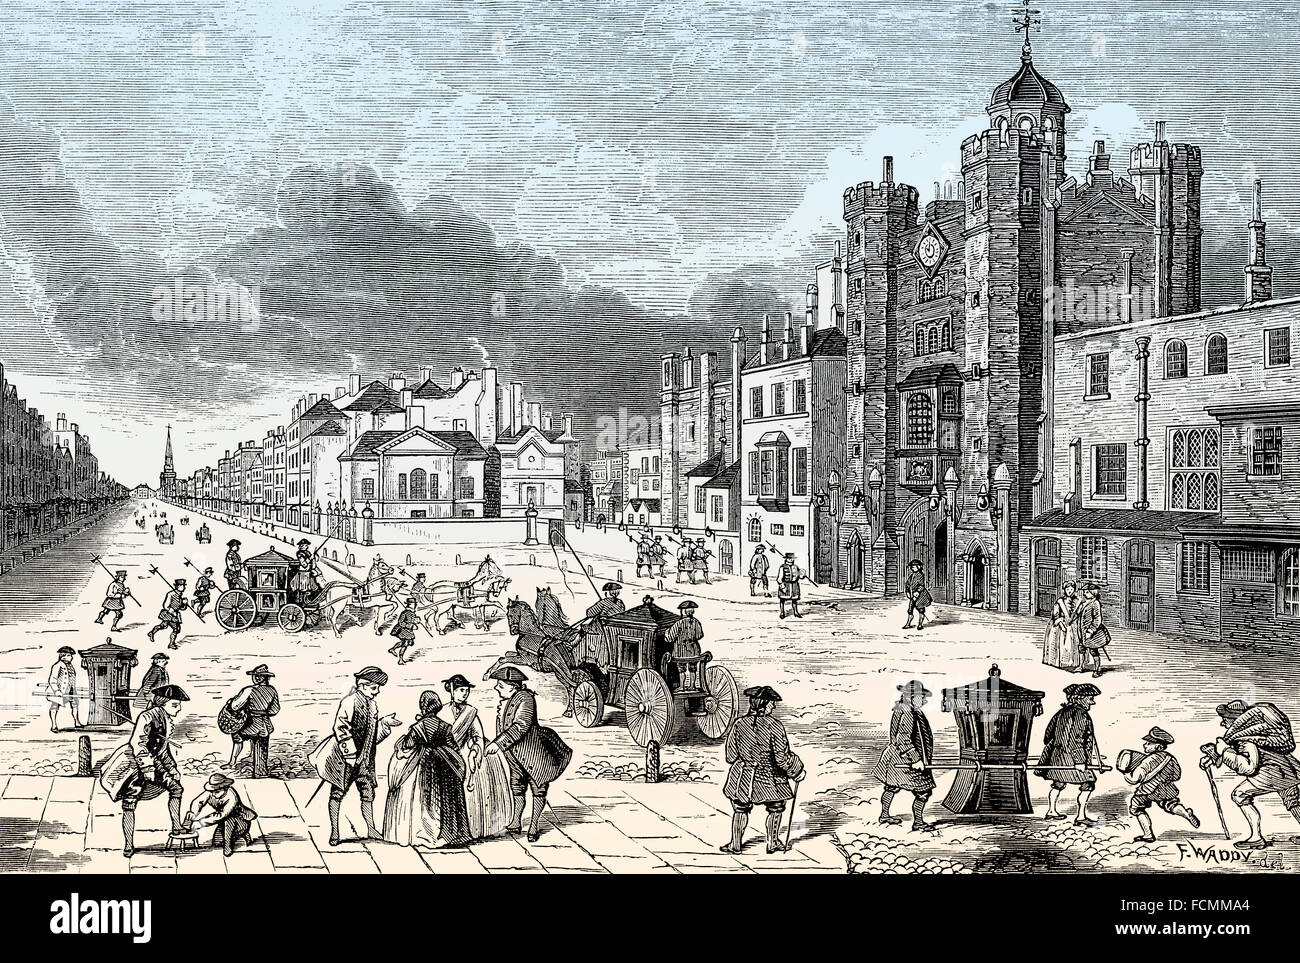 St James's Palace, 1820, City of Westminster, London, England Banque D'Images